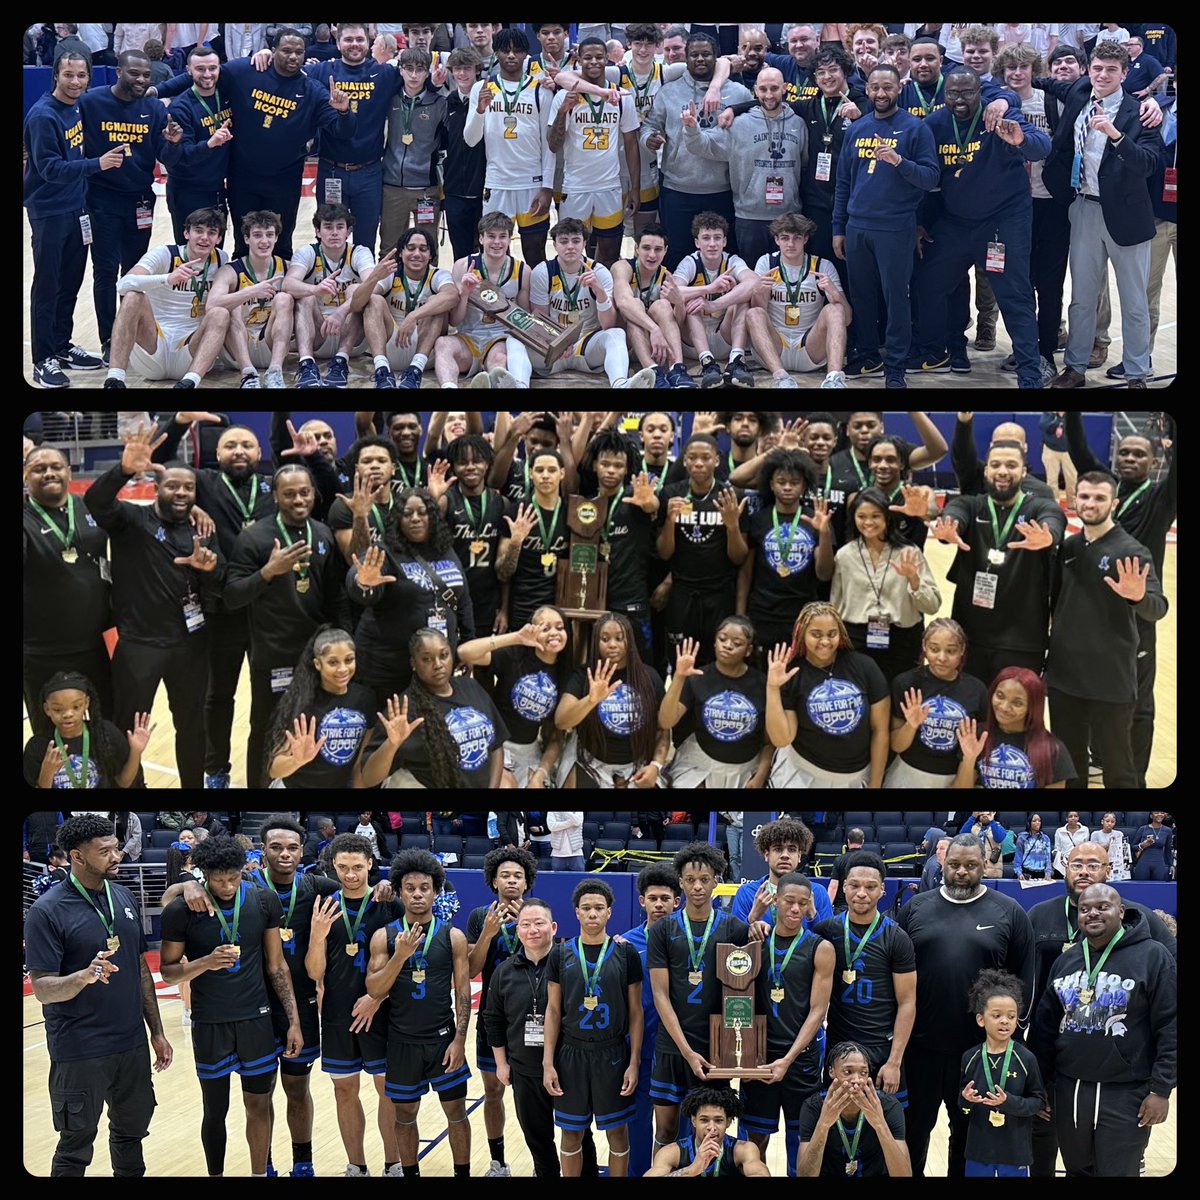 Northeast Ohio claims three state championships in Dayton today! Make that seven in two years. 🏆 🔥 D-1: St. Ignatius D-3: Lutheran East D-4: Richmond Heights @NEOSportsInside